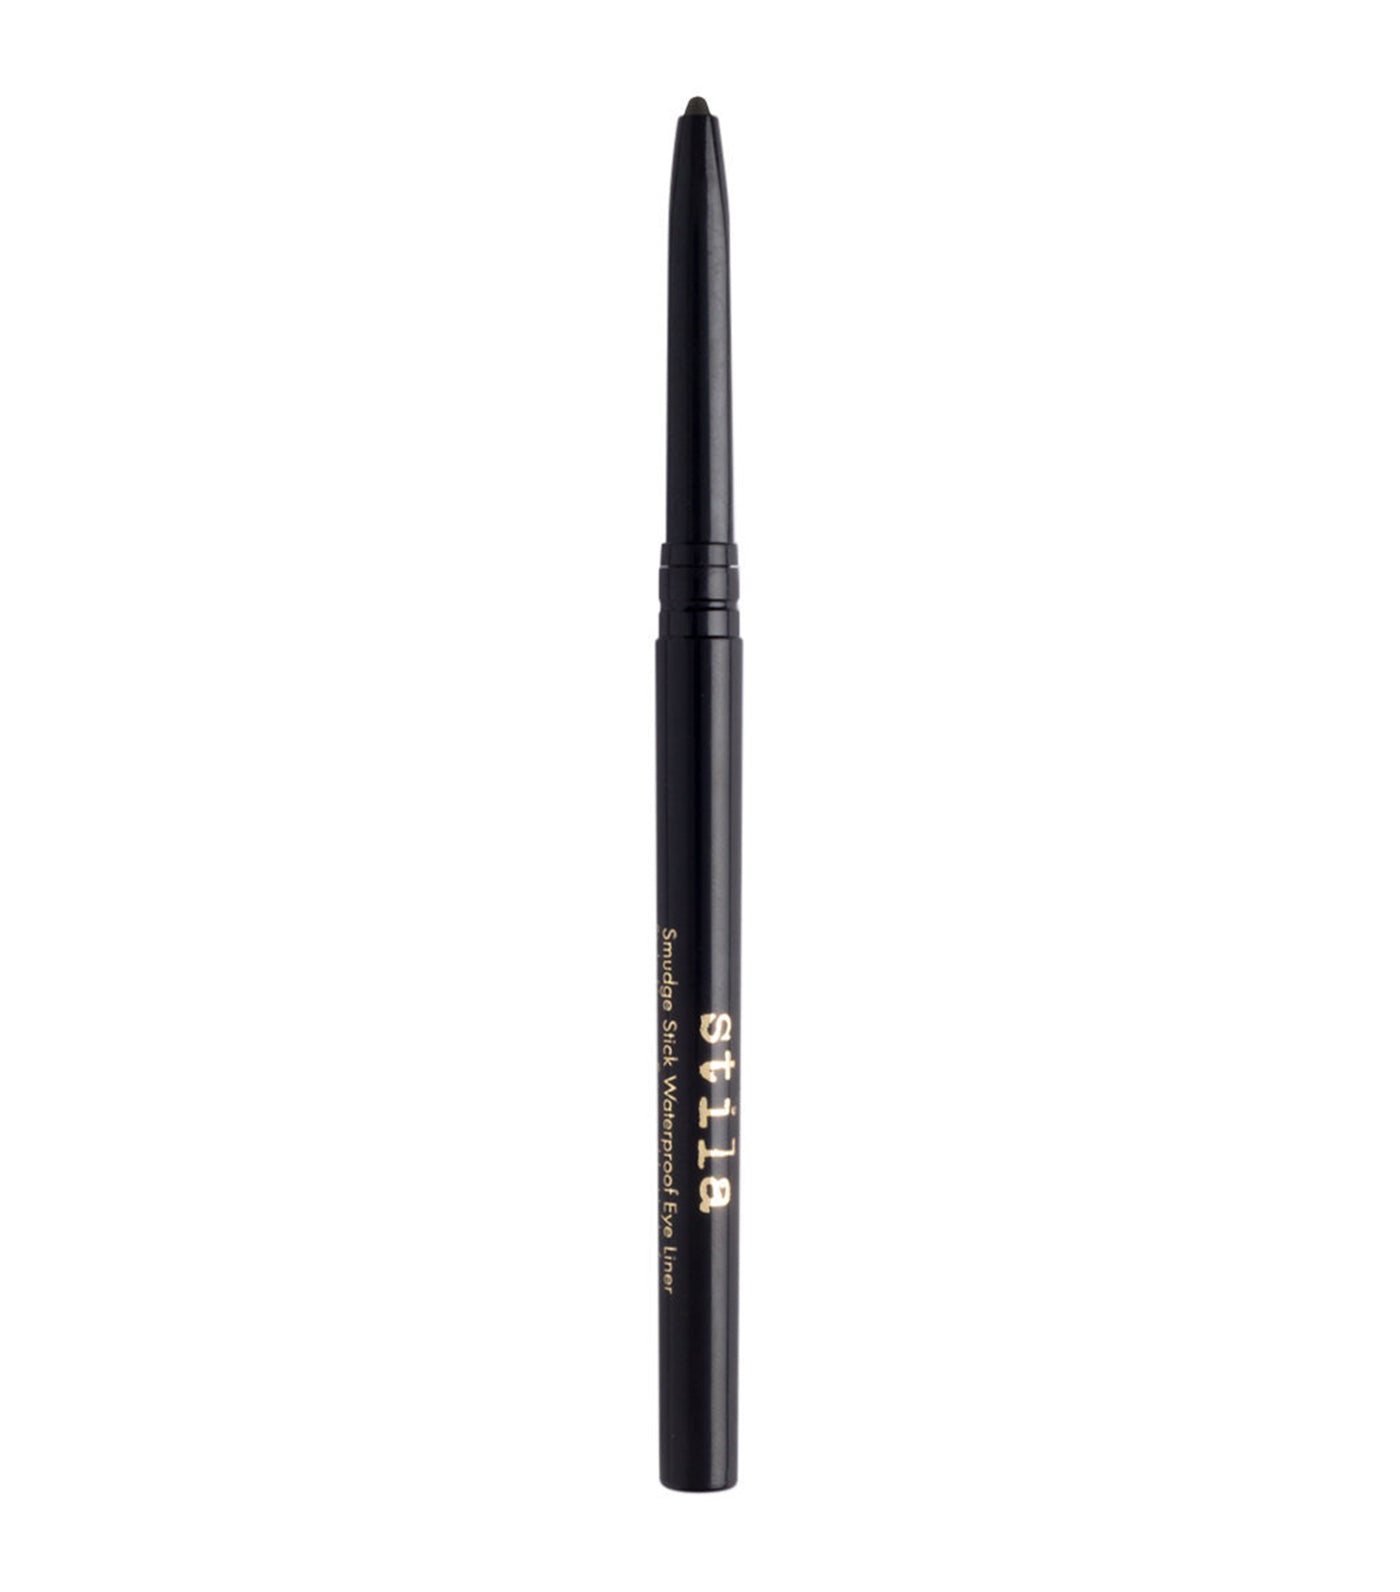 A waterproof liner that won't quit: The K-Palette Real Lasting Eyepencil —  Project Vanity